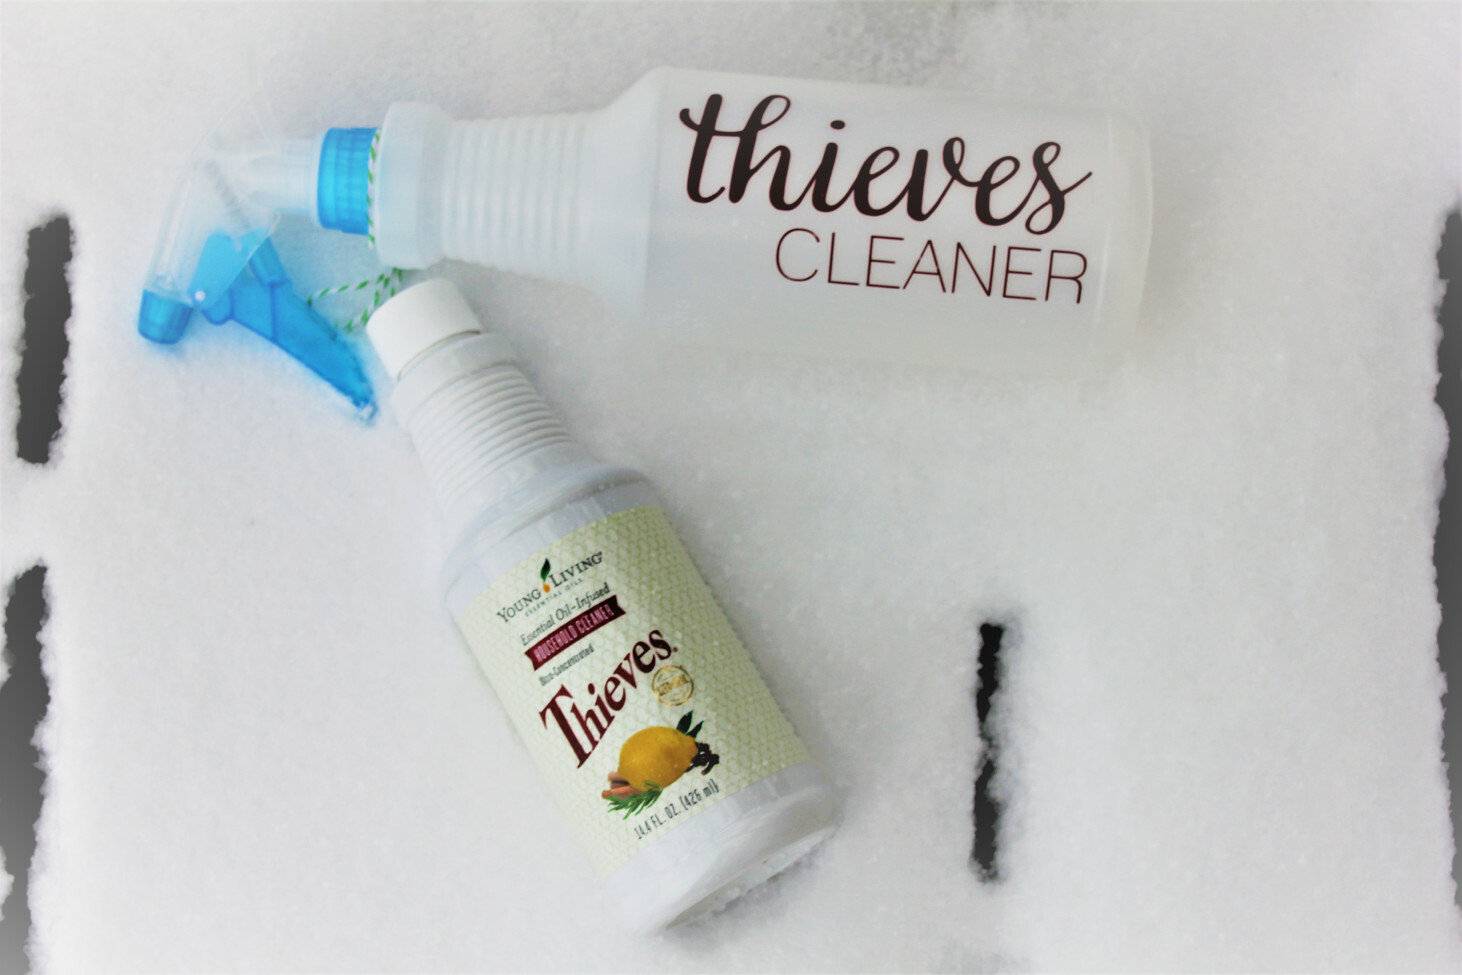 5 Uses for Thieves Cleaner (besides wiping down your counter)